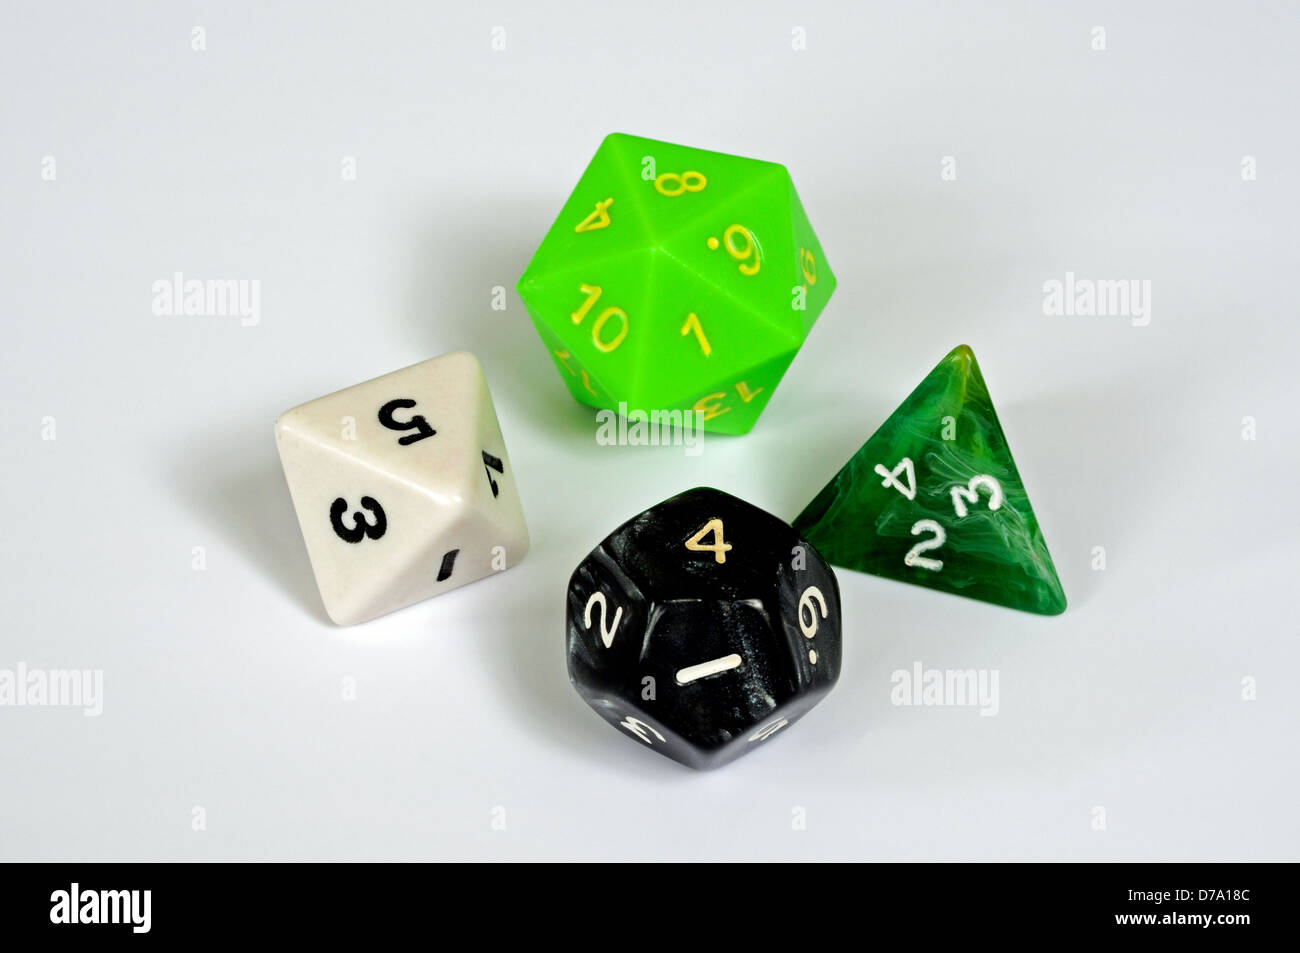 Platonic dice selection against a white background. Stock Photo